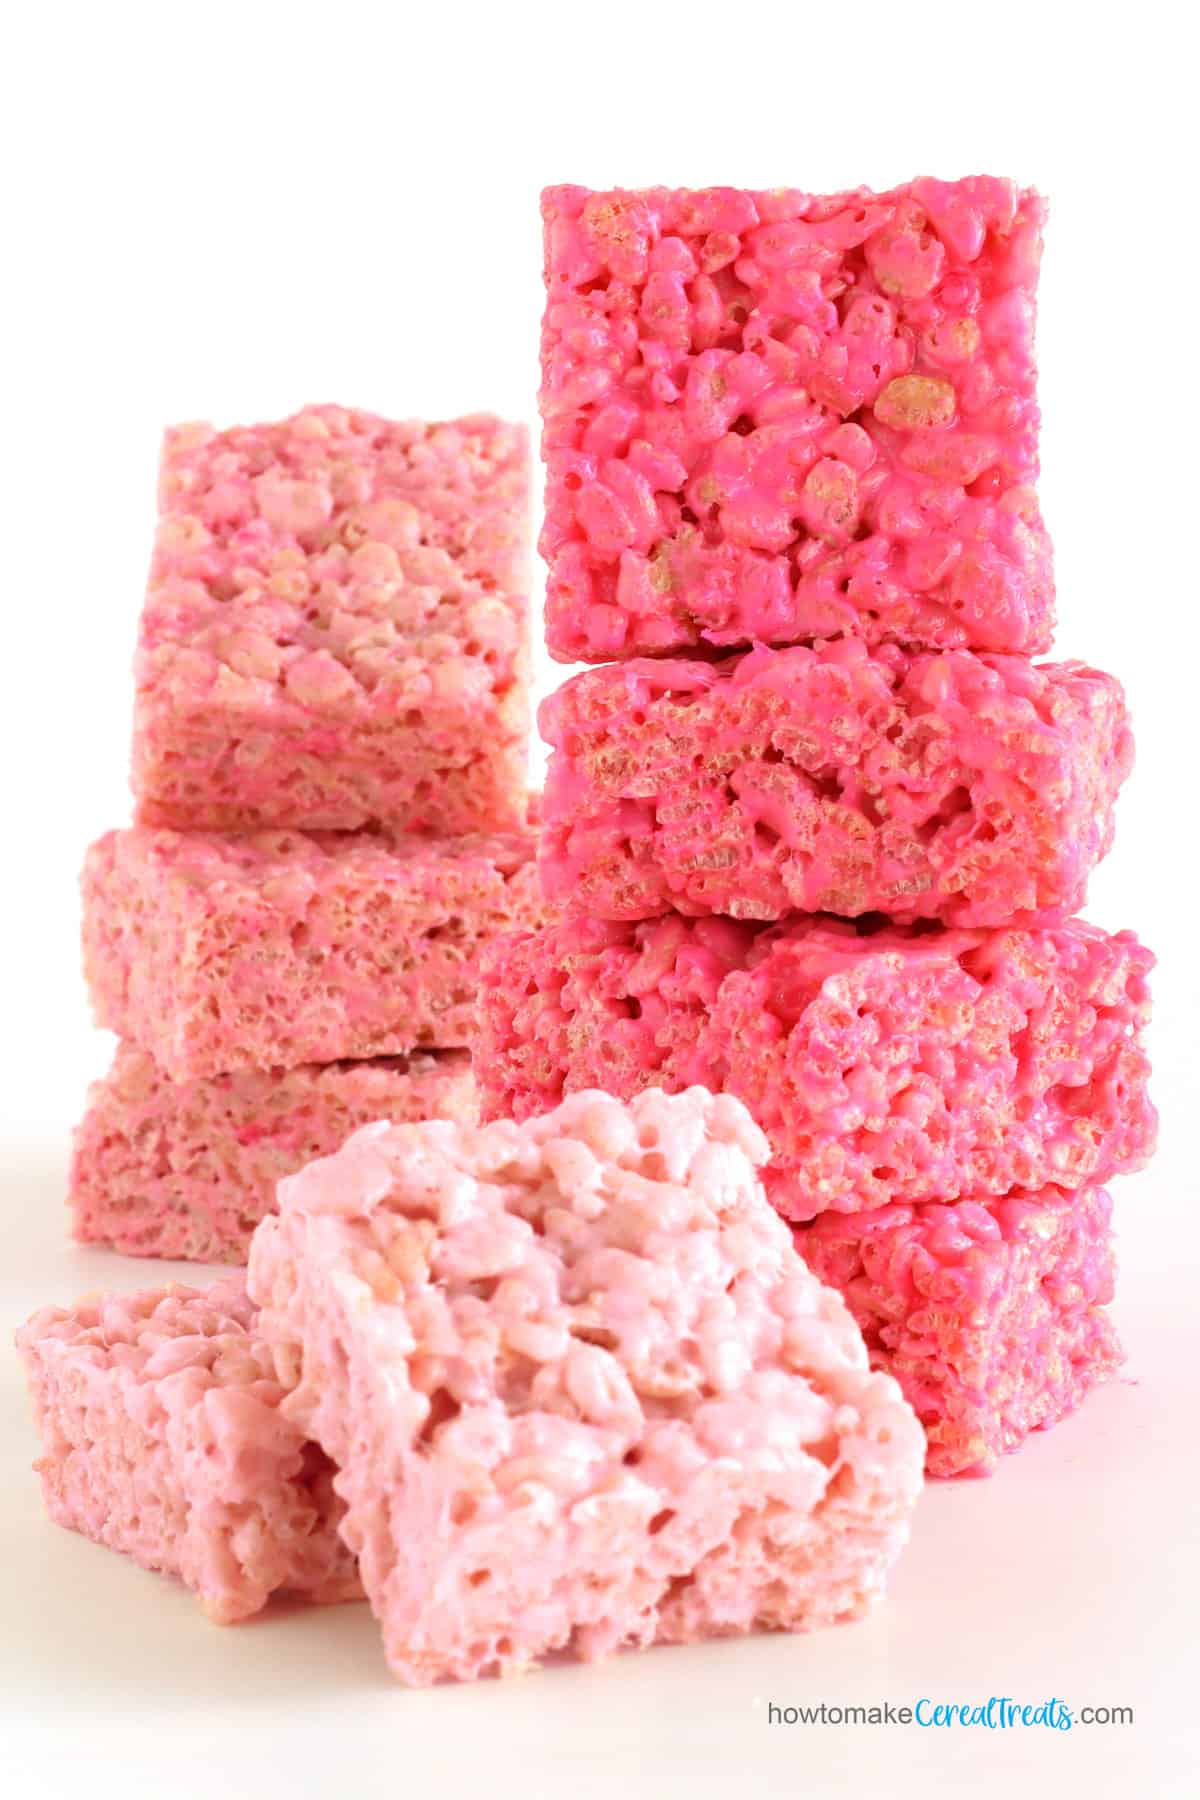 Pink Rice Krispie Treats in three different shades of pink